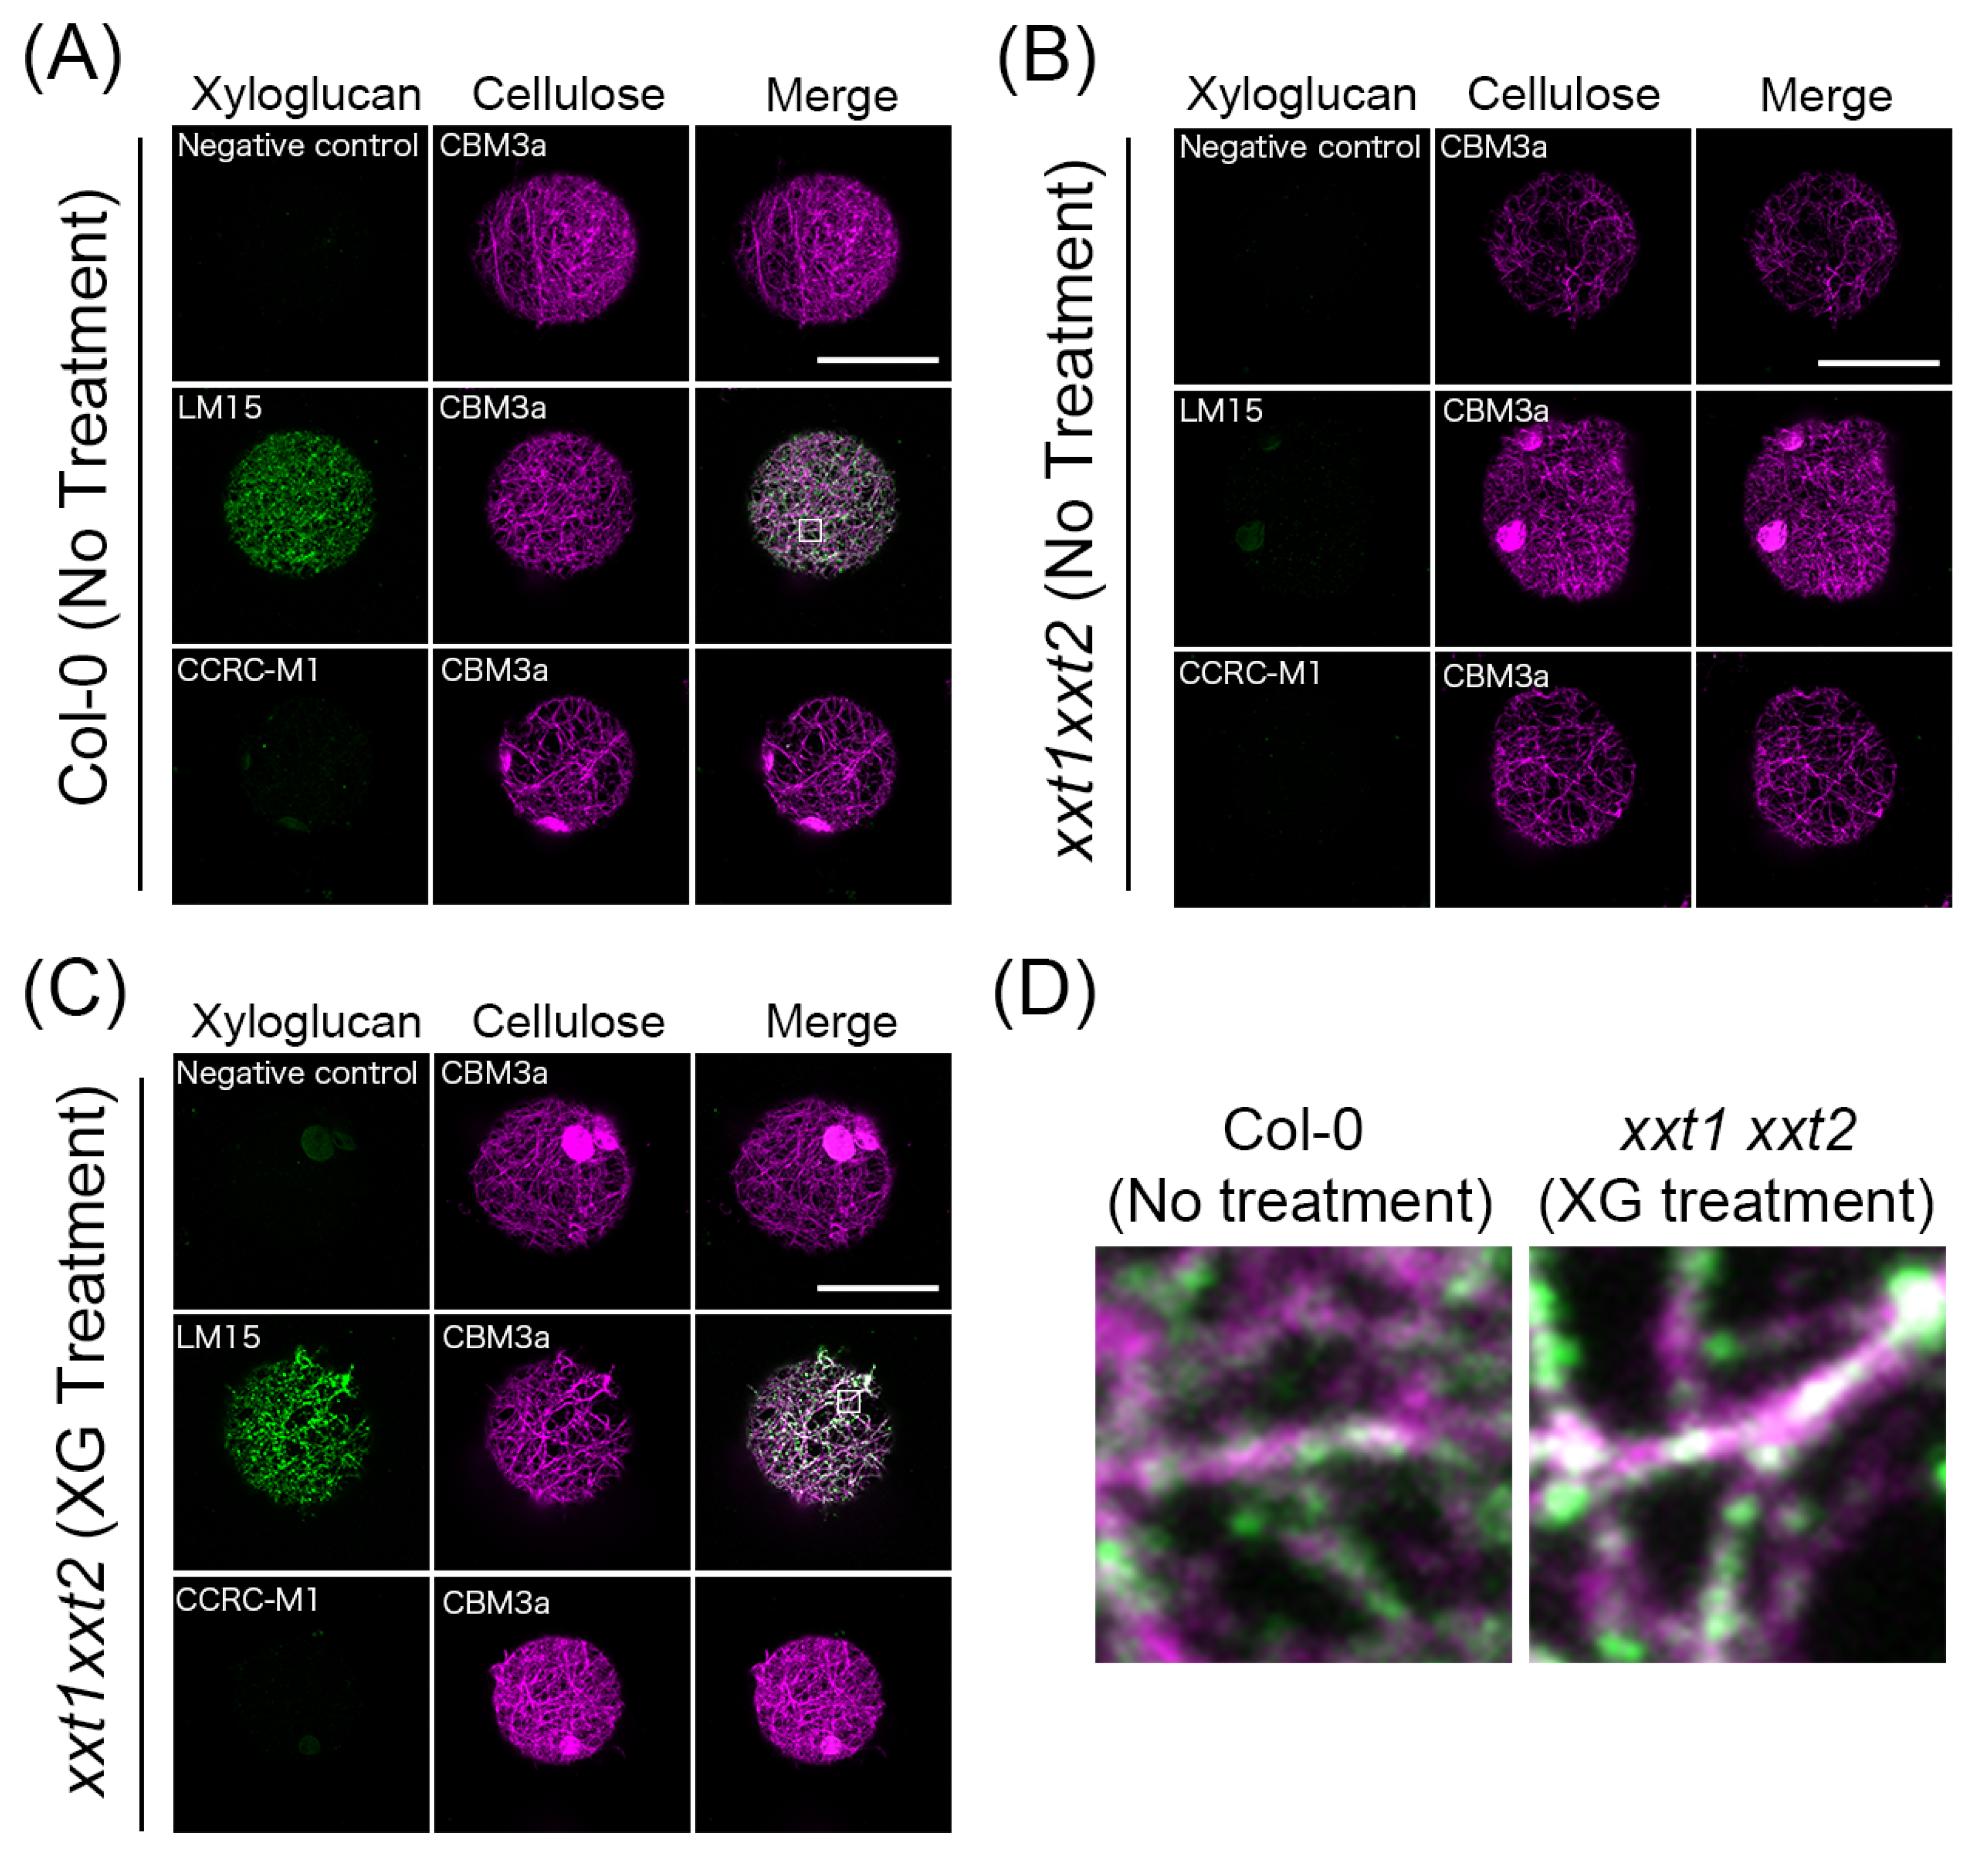 Plants Free Full Text Xyloglucan Is Not Essential For The Formation And Integrity Of The Cellulose Network In The Primary Cell Wall Regenerated From Arabidopsis Protoplasts Html